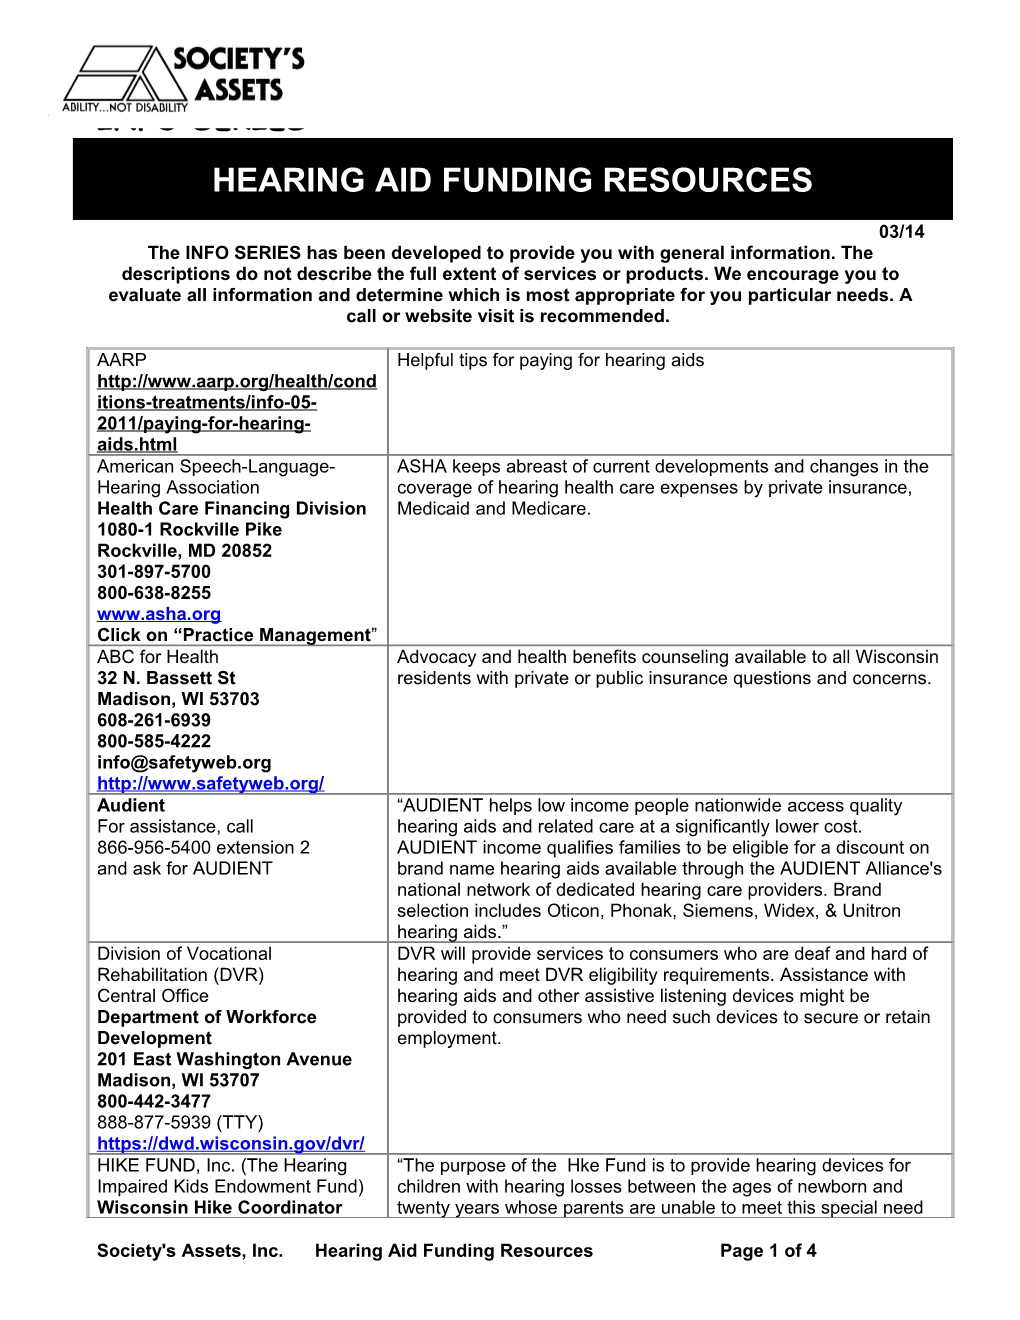 Hearing Aid Funding Resources